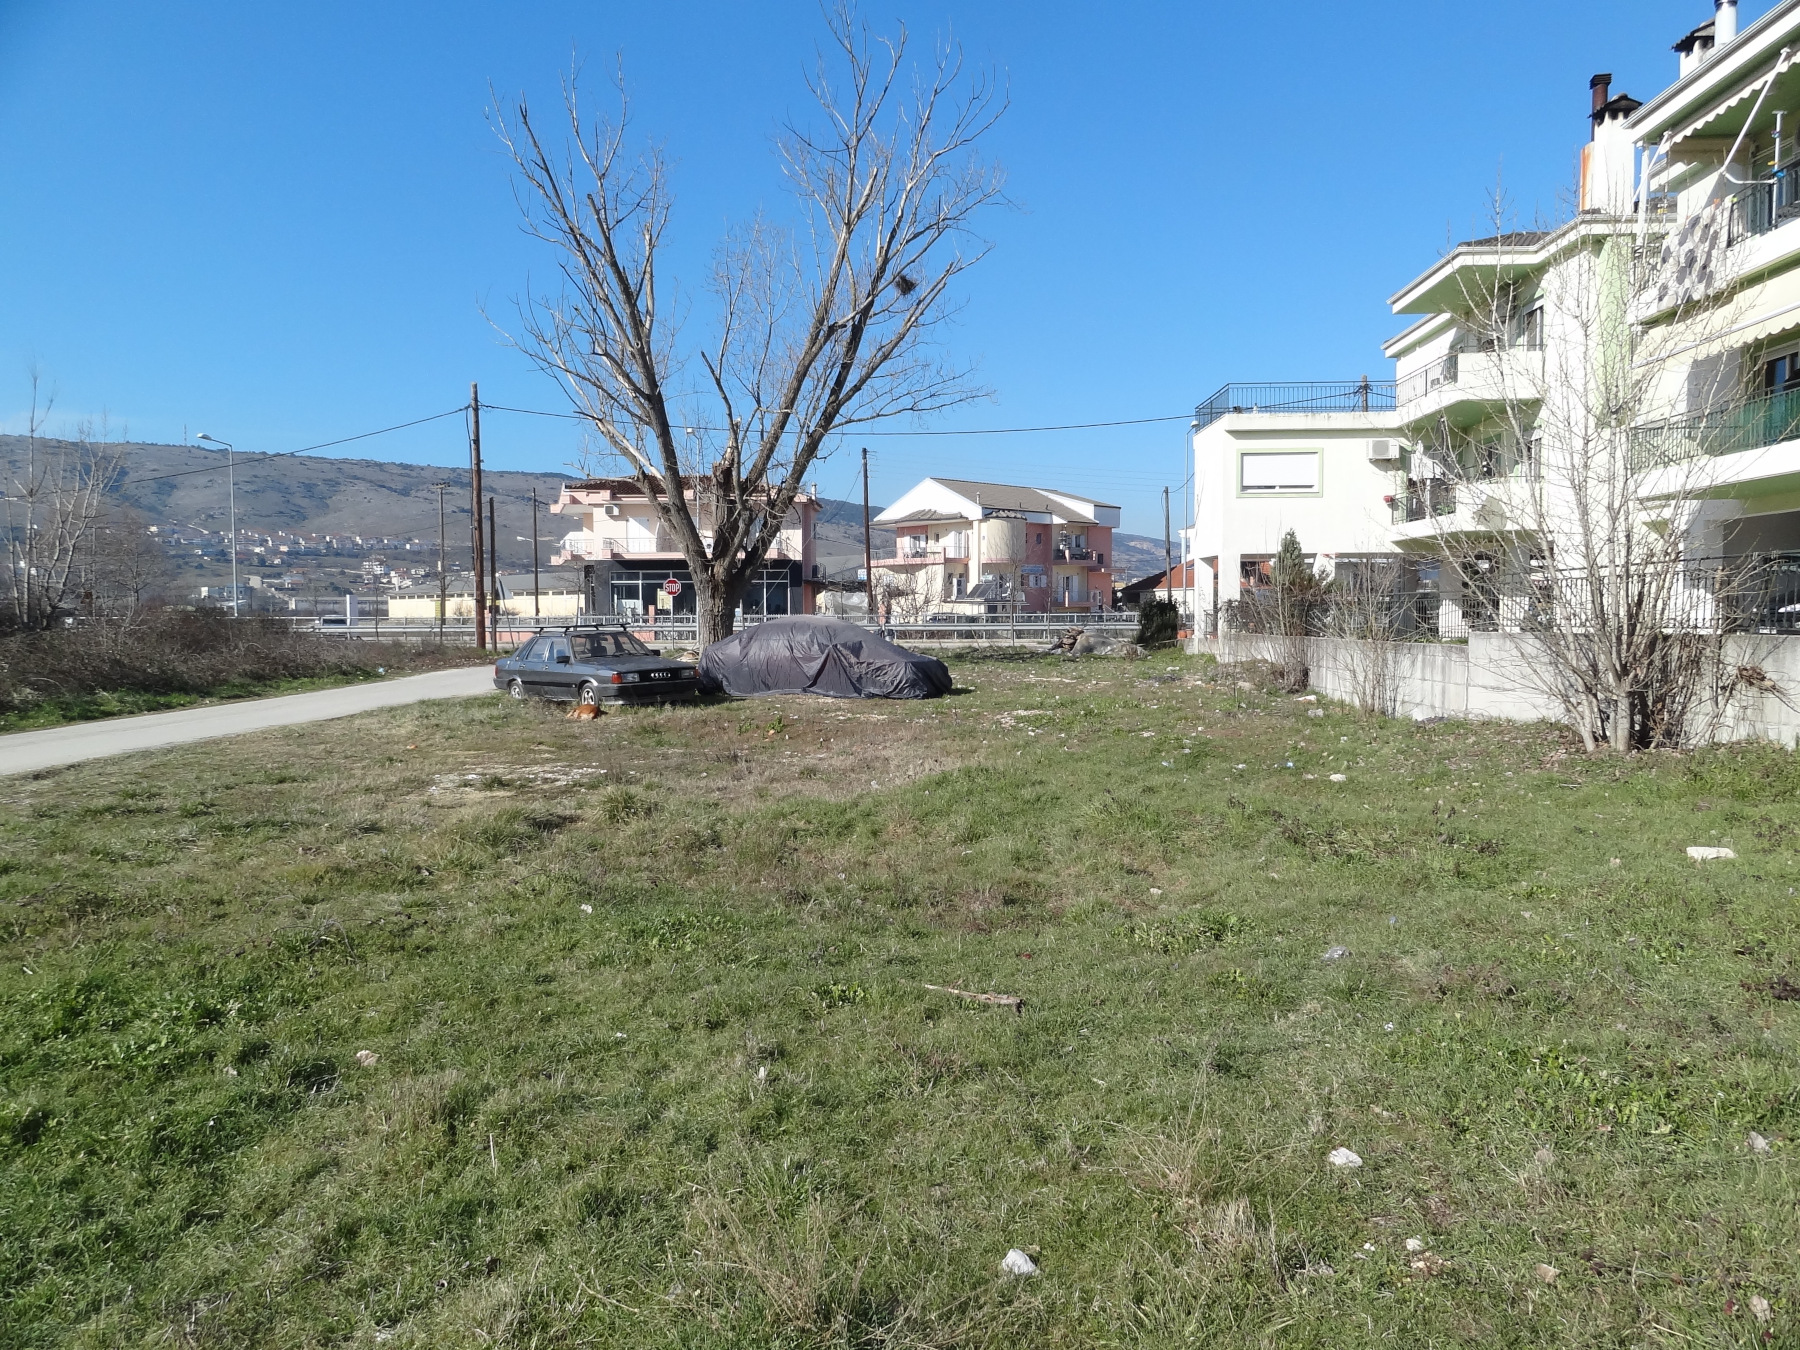 For sale corner plot of 601 sq.m. and S.D. 0.6 in Kato Neochoropoulo, Ioannina on the corner of P. Asimakopoulou and Tellou Agra streets